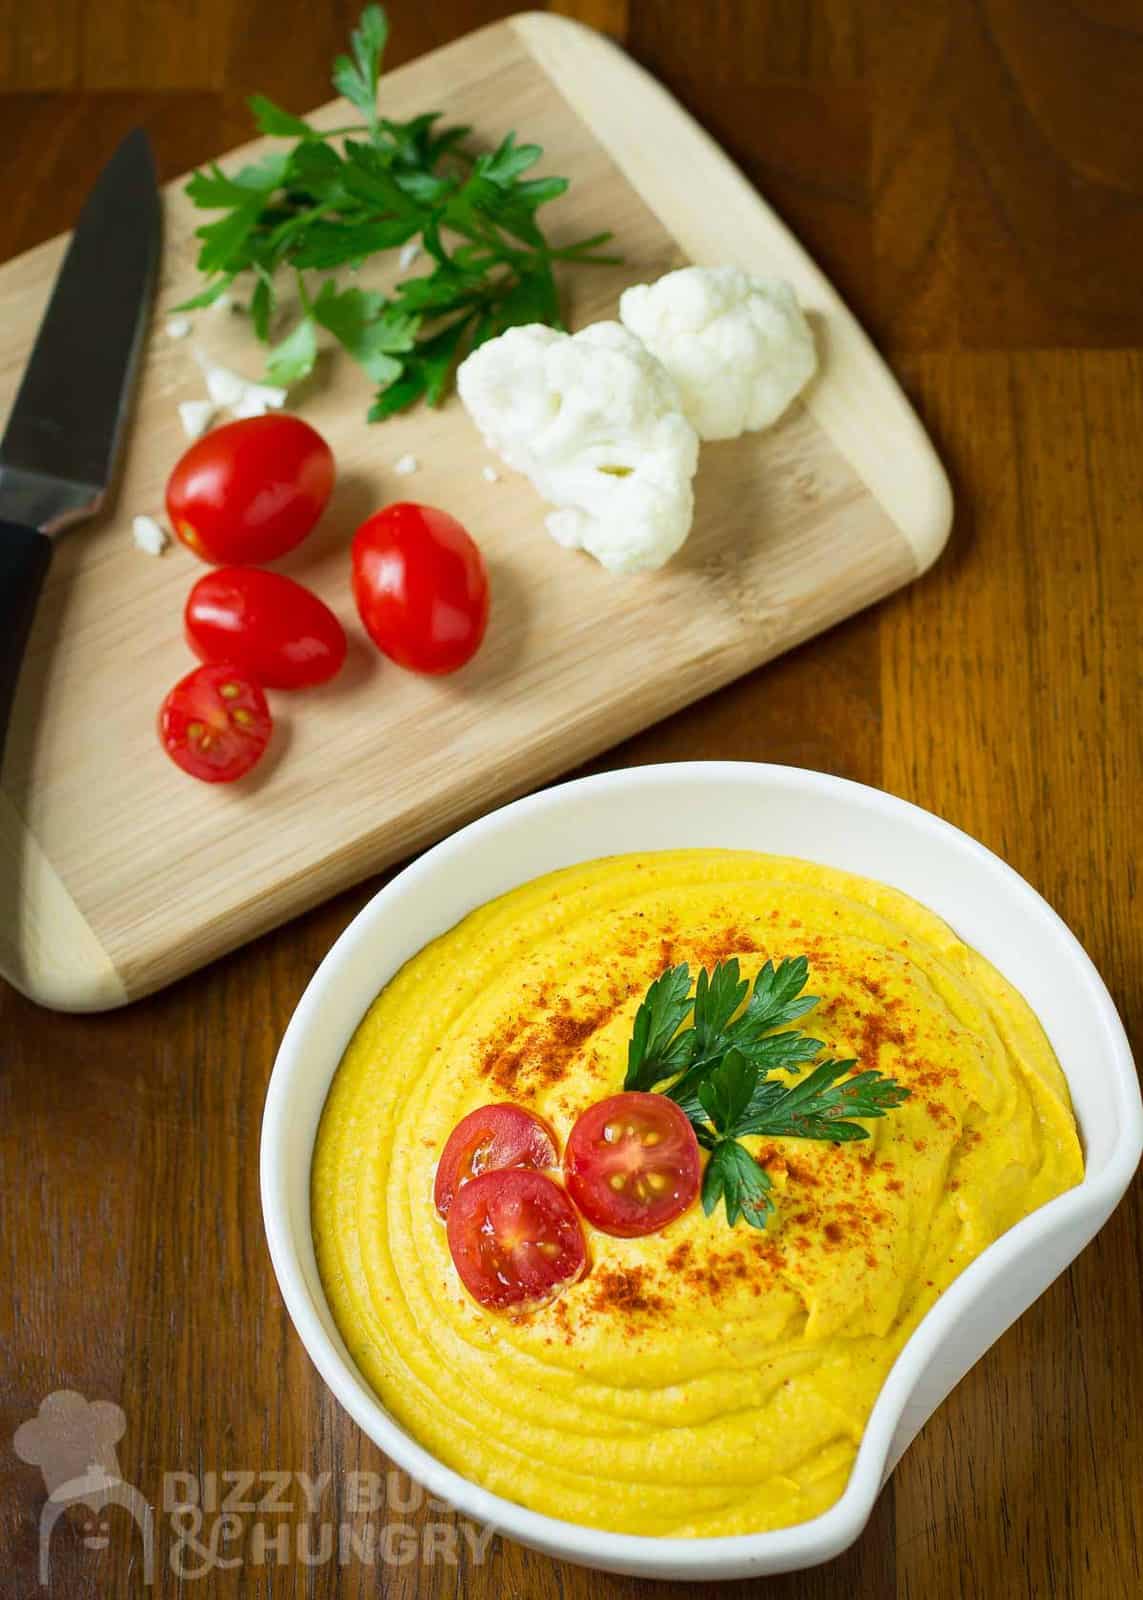 Side shot of hummus in a white bowl garnished with cherry tomatoes, herbs, and paprika with a wooden cutting board with cherry tomatoes, cauliflower, herbs, and a knife in the background all on a wooden surface.